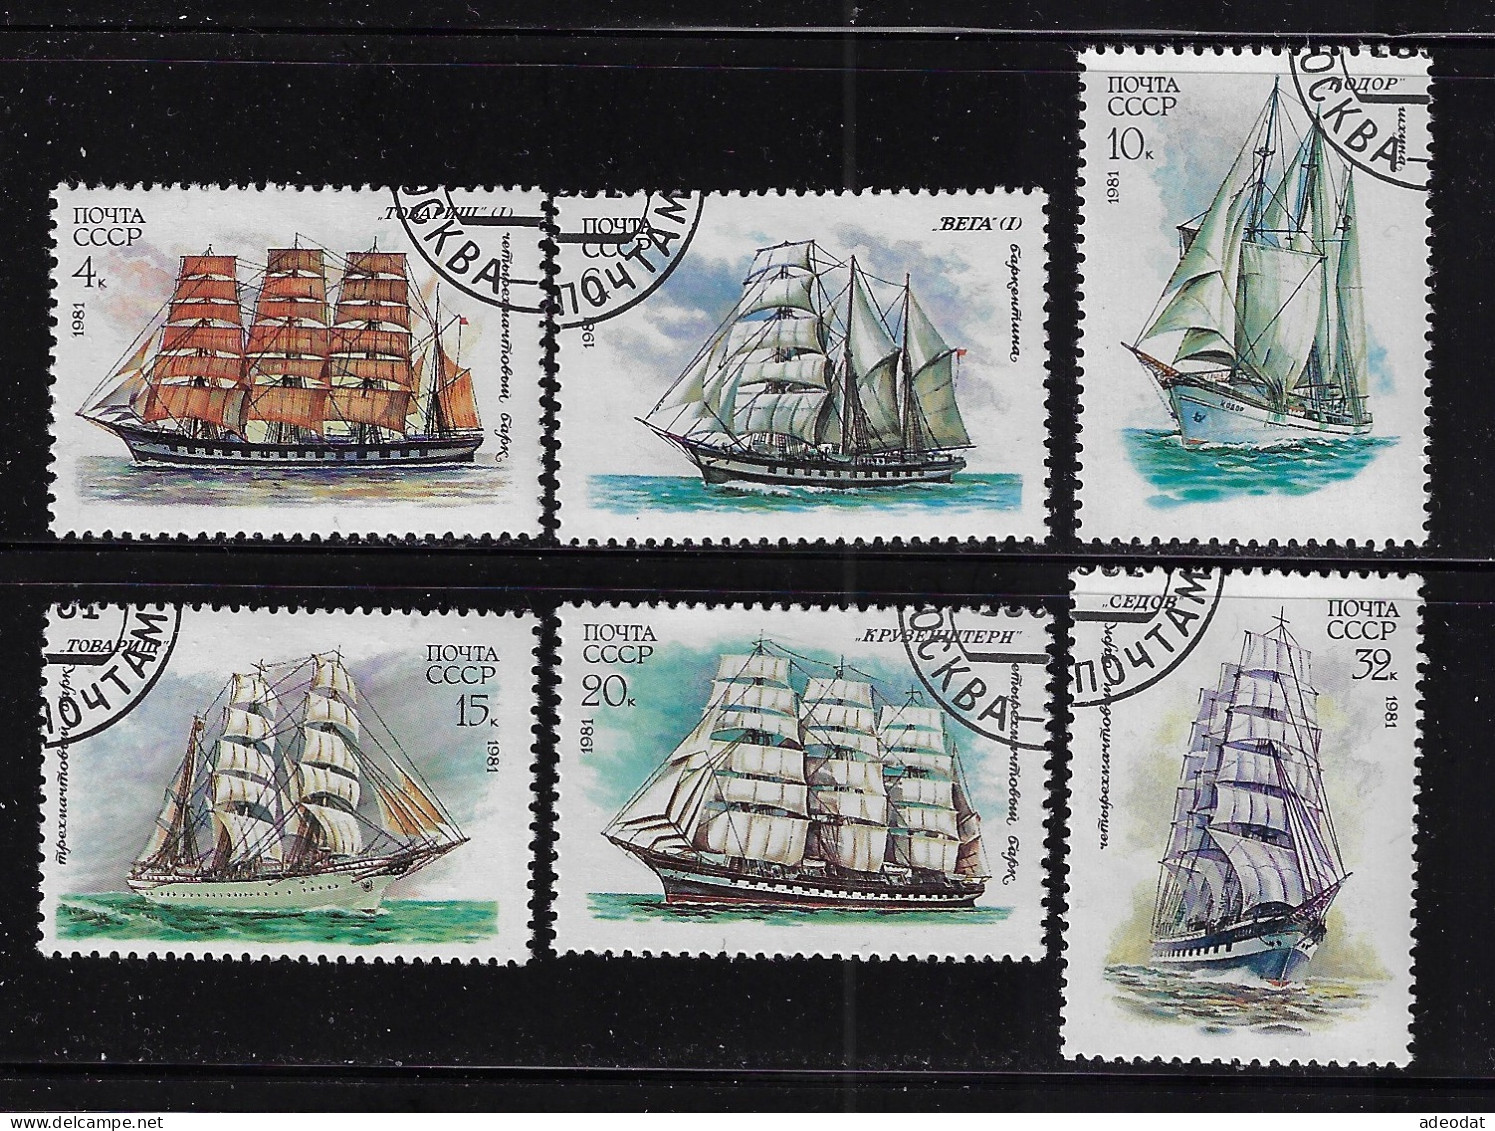 RUSSIA 1981 SCOTT #4981-4986 USED - Used Stamps